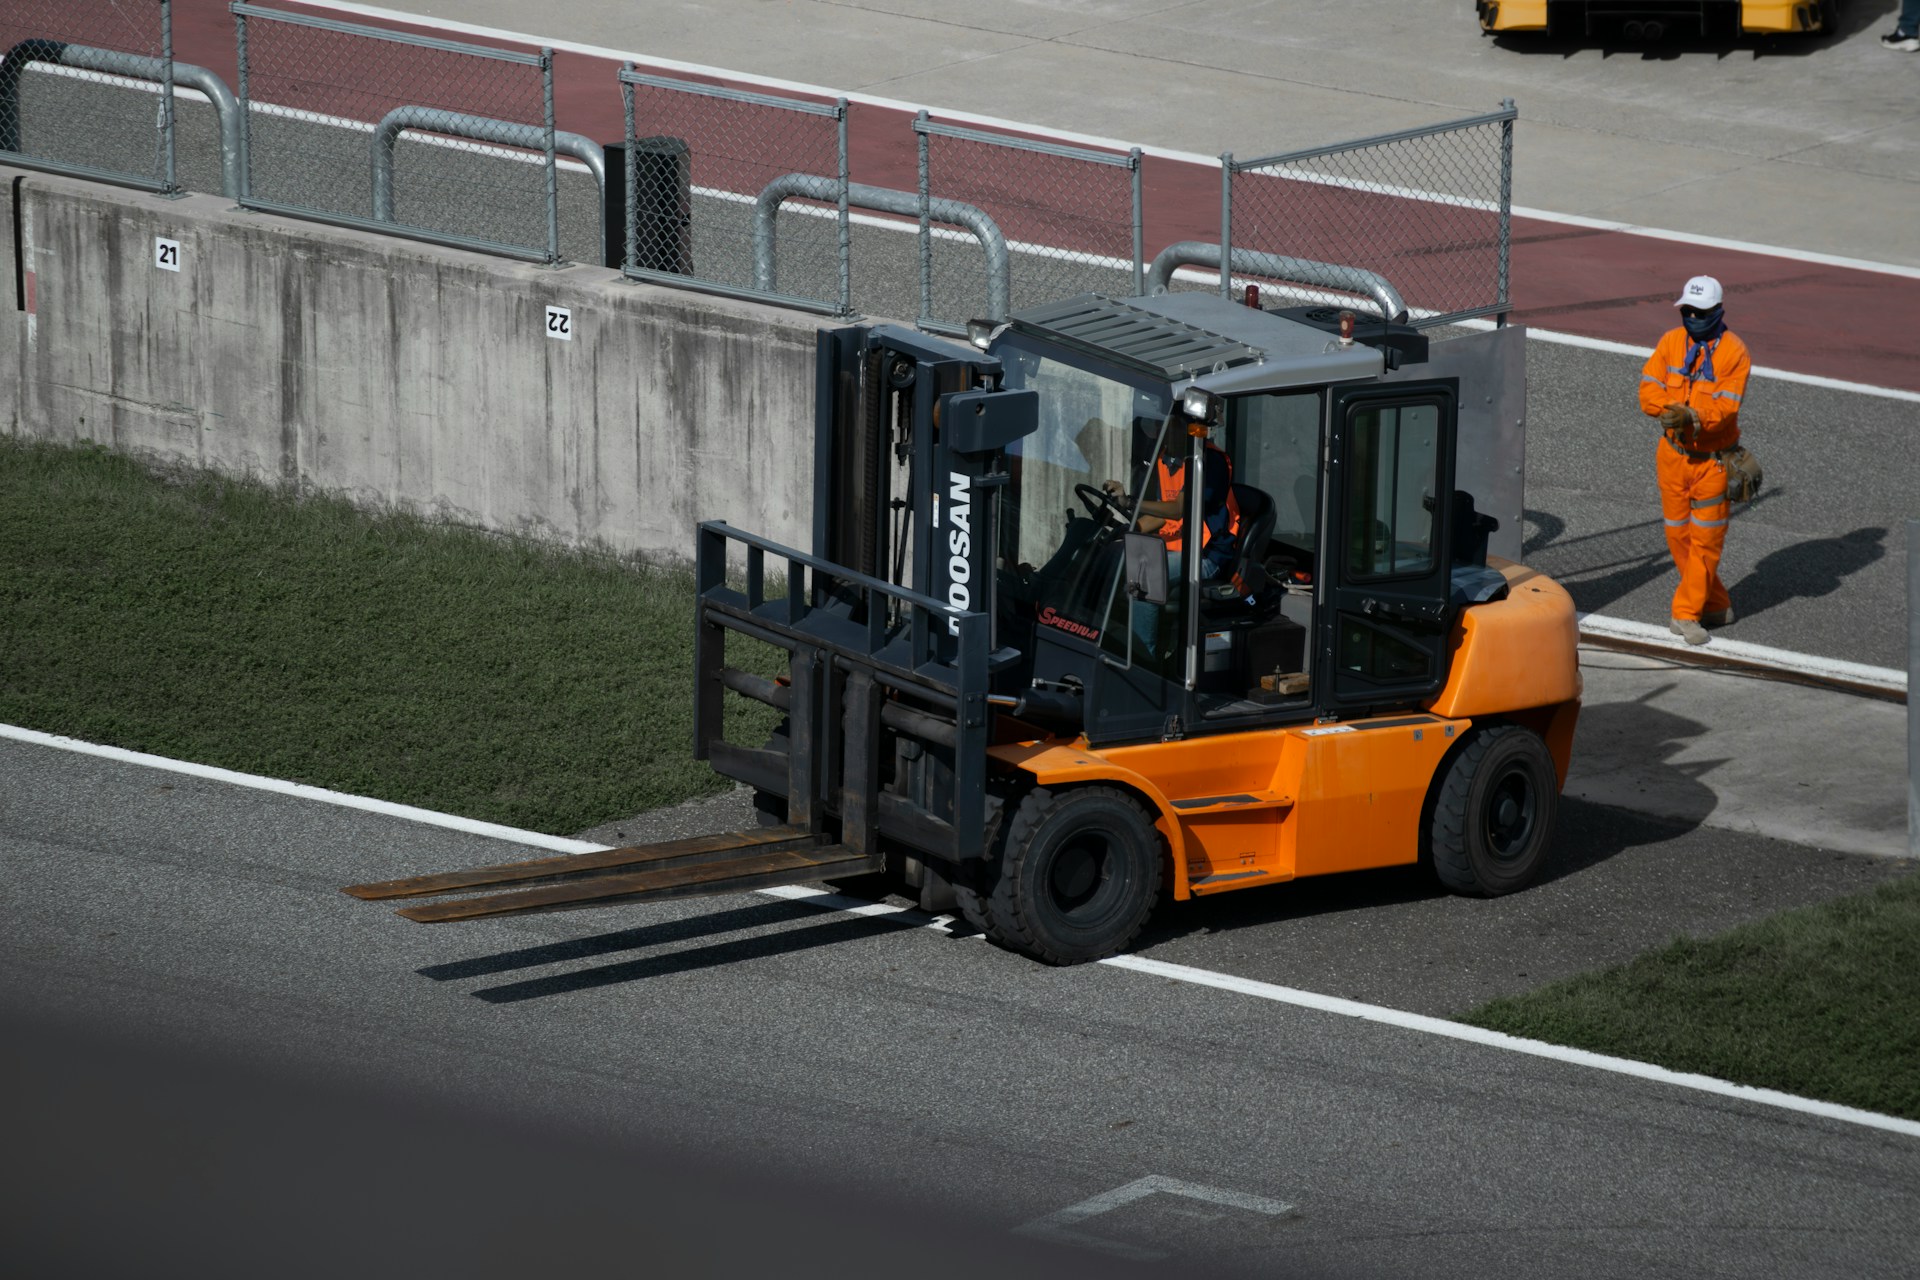 6 Things to Look For When Buying Second-Hand Forklift